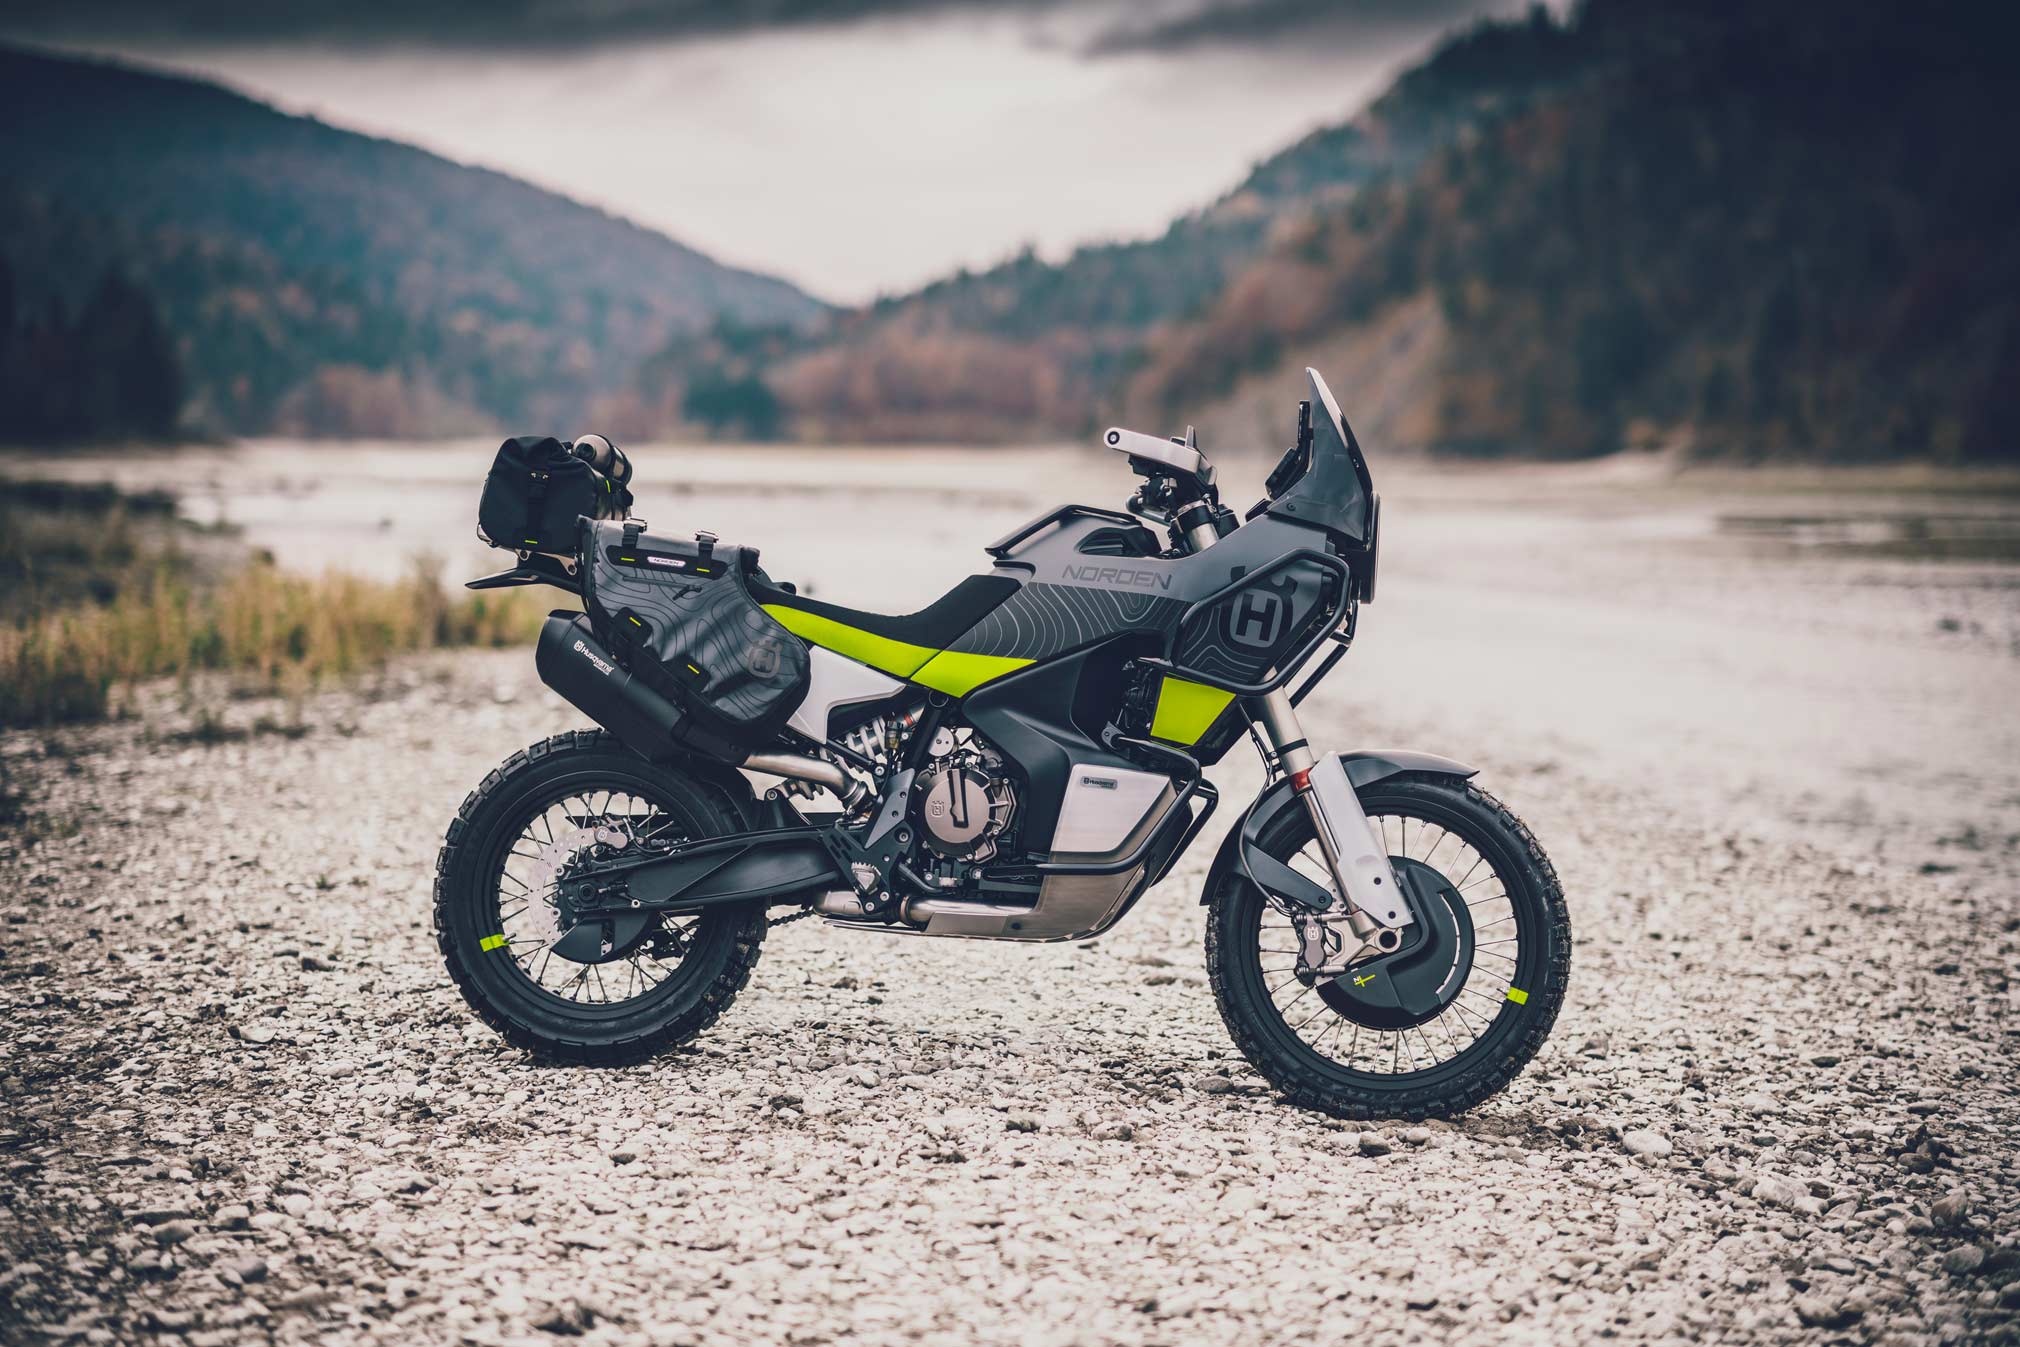 Enduro Motorbike: Husqvarna Norden 901, Specially Designed For Gravel Road, Most Parts Are Reinforced With Carbon Fiber. 2020x1350 HD Background.